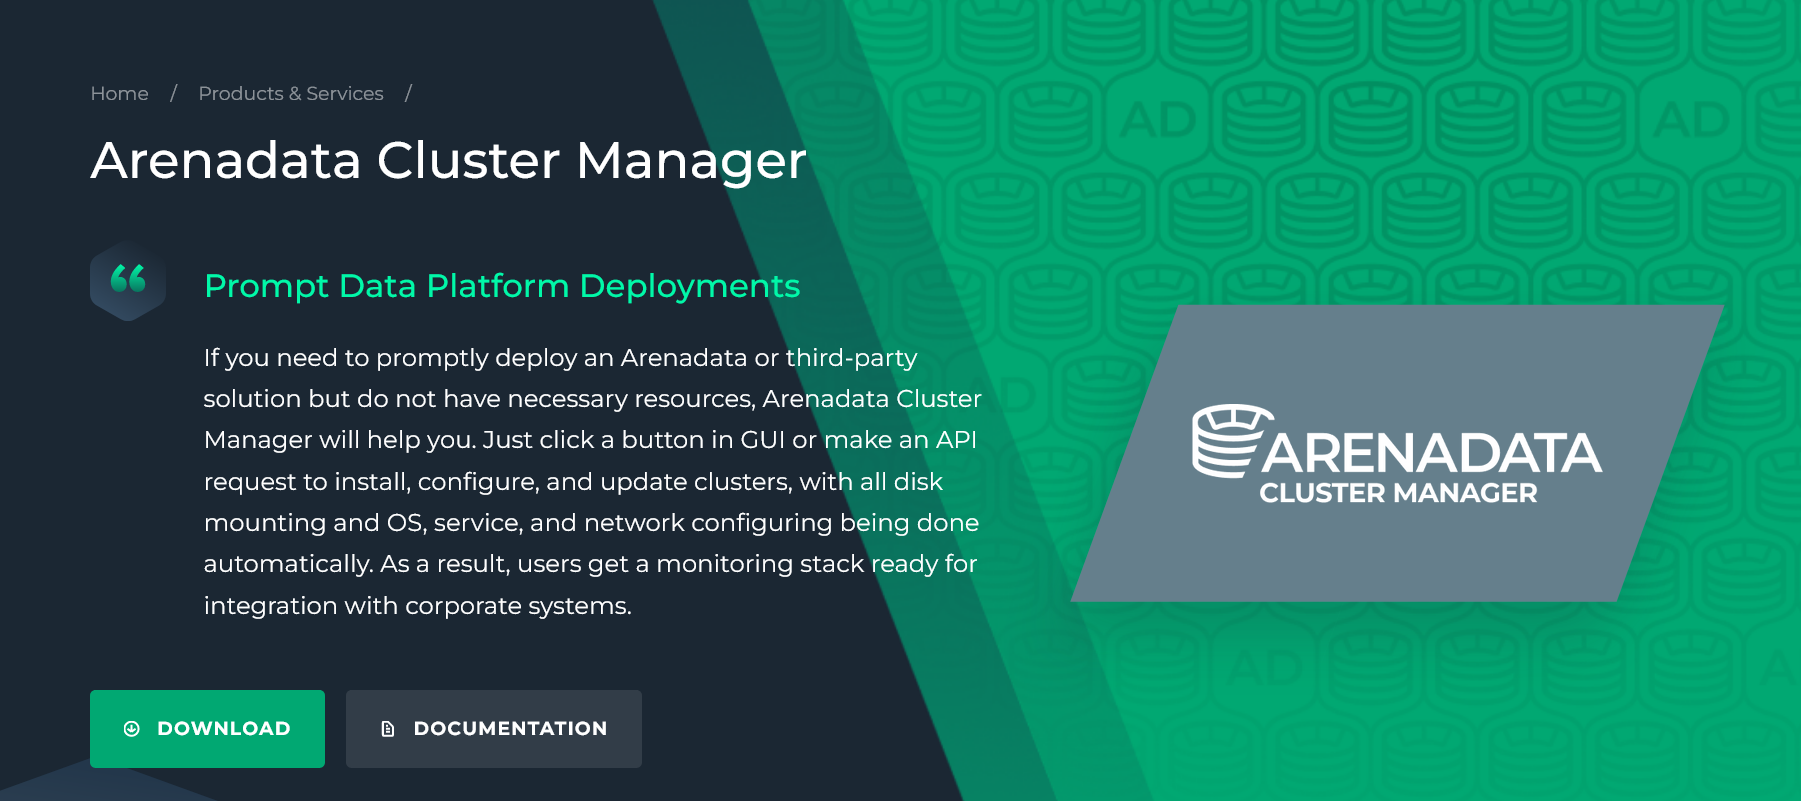 Switch to the Arenadata Cluster Manager download page